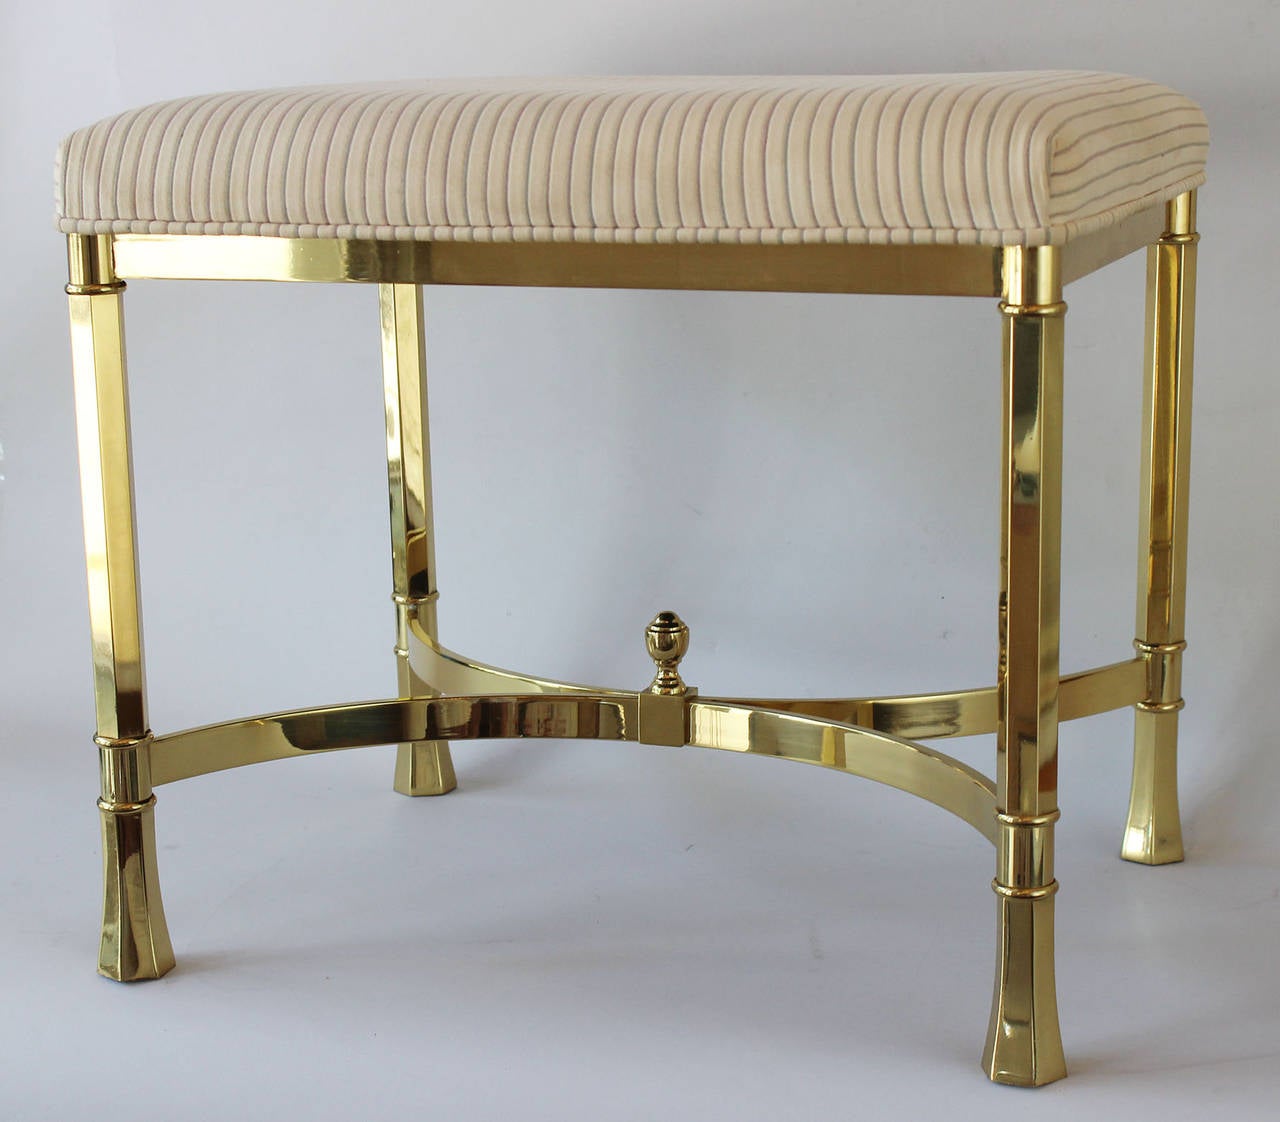 A very solid pair of Regency style brass ottomans in vintage upholstery.

complementary shipping within 30 miles